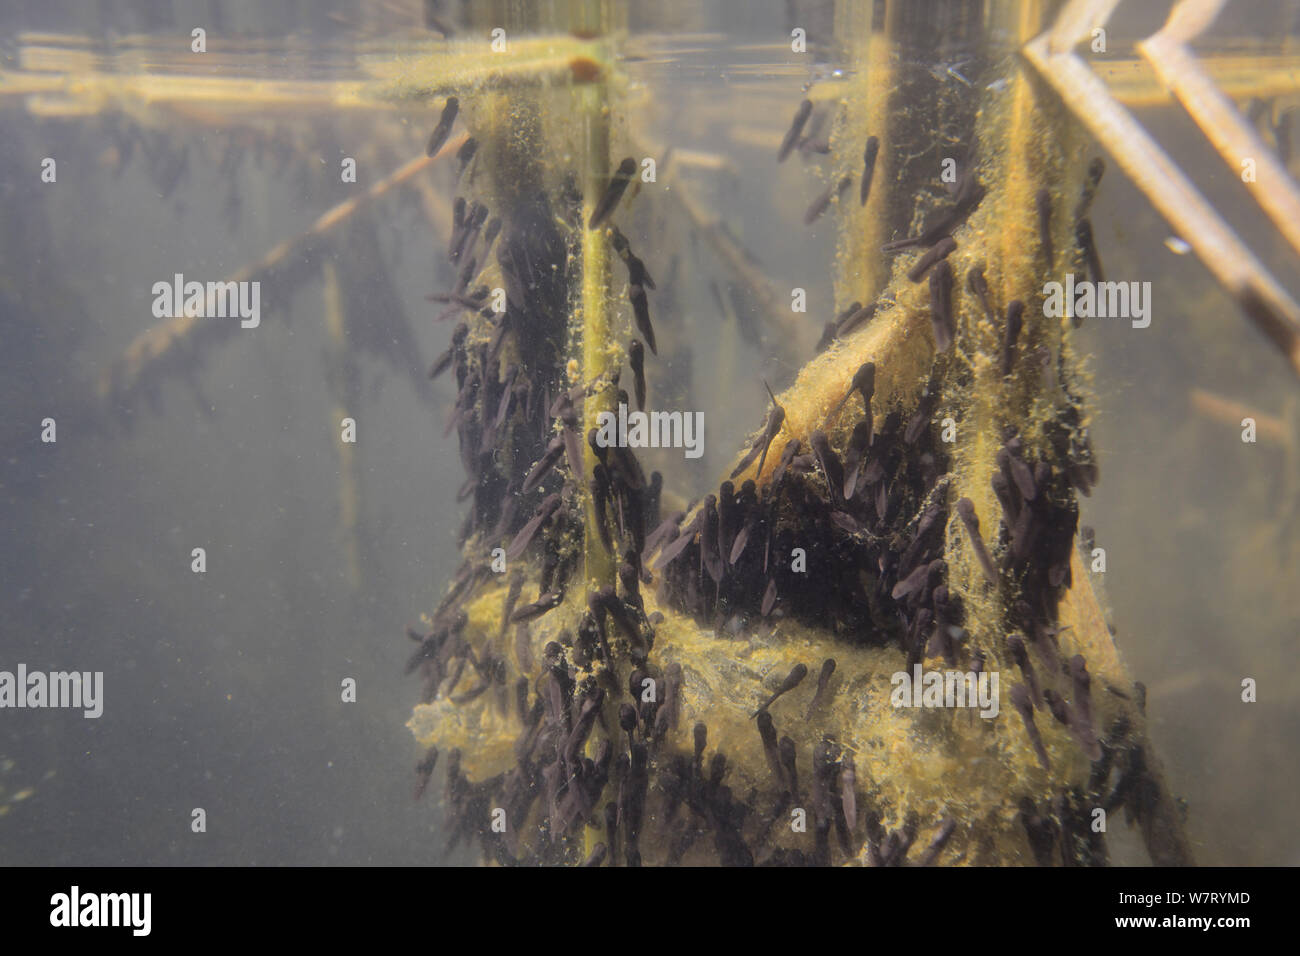 Young Common frog tadpoles (Rana temporaria) feeding on green algae attached to reed stems in a freshwater pond, Wiltshire, UK, May. Stock Photo